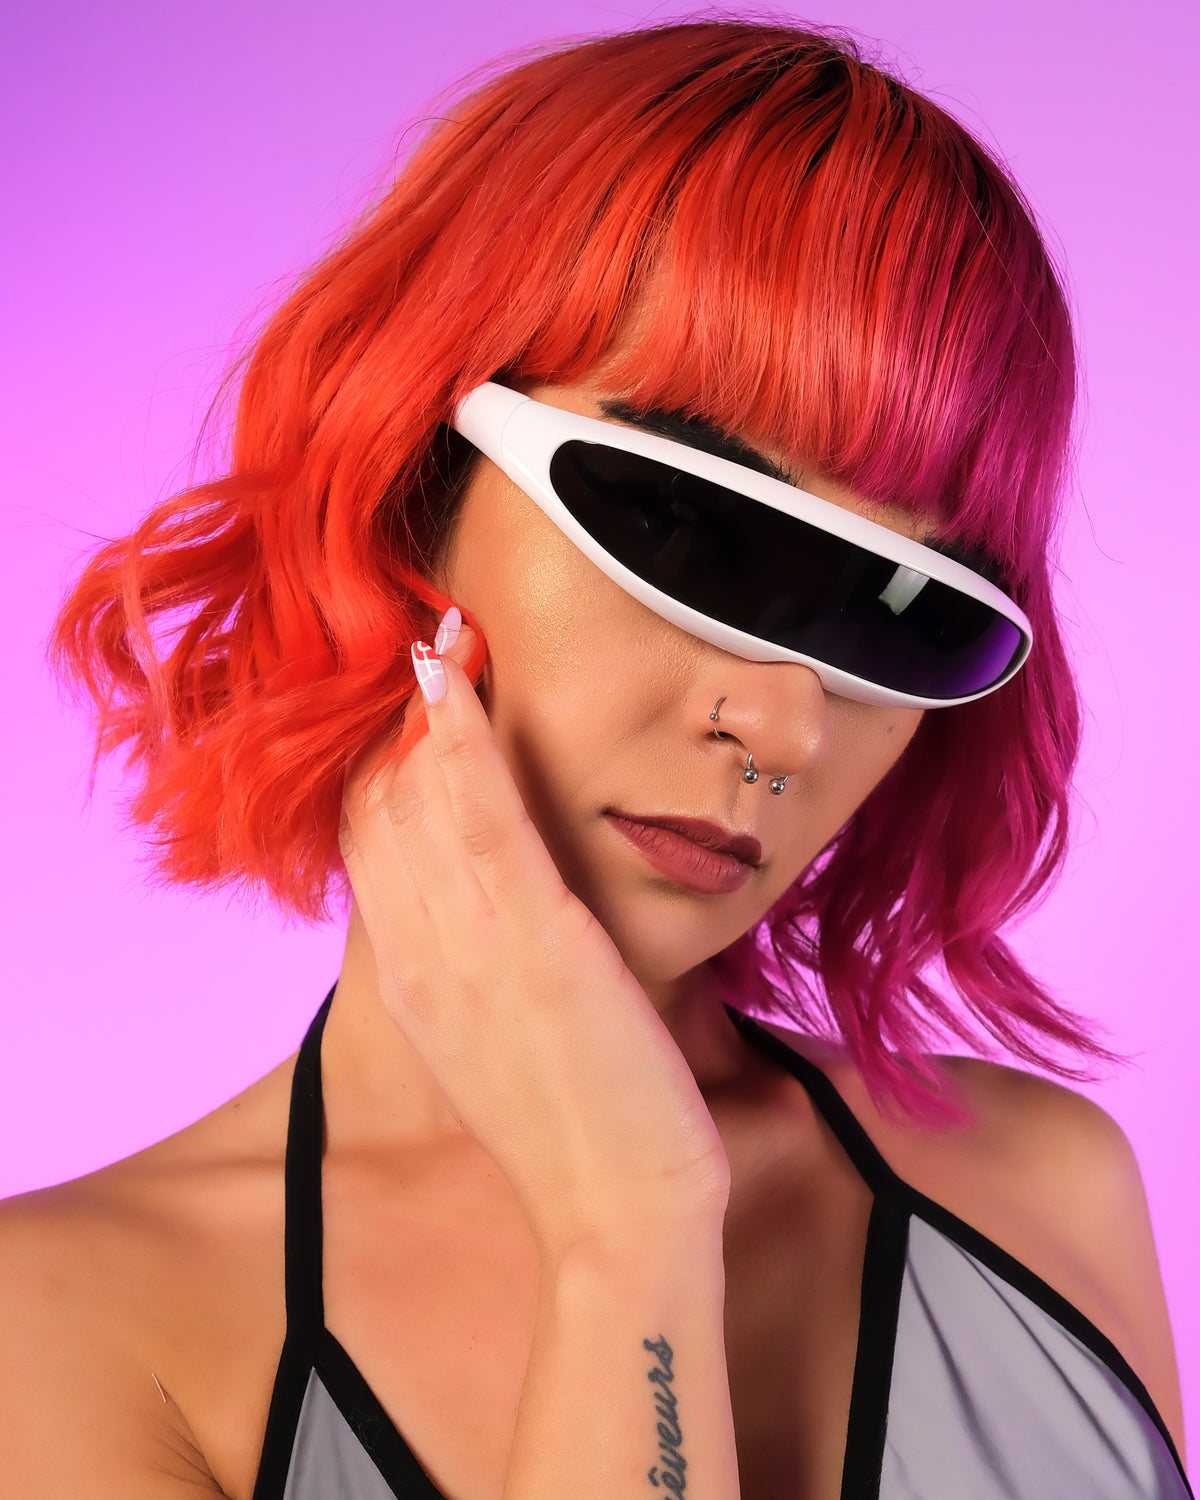 Space Cyclops Glasses